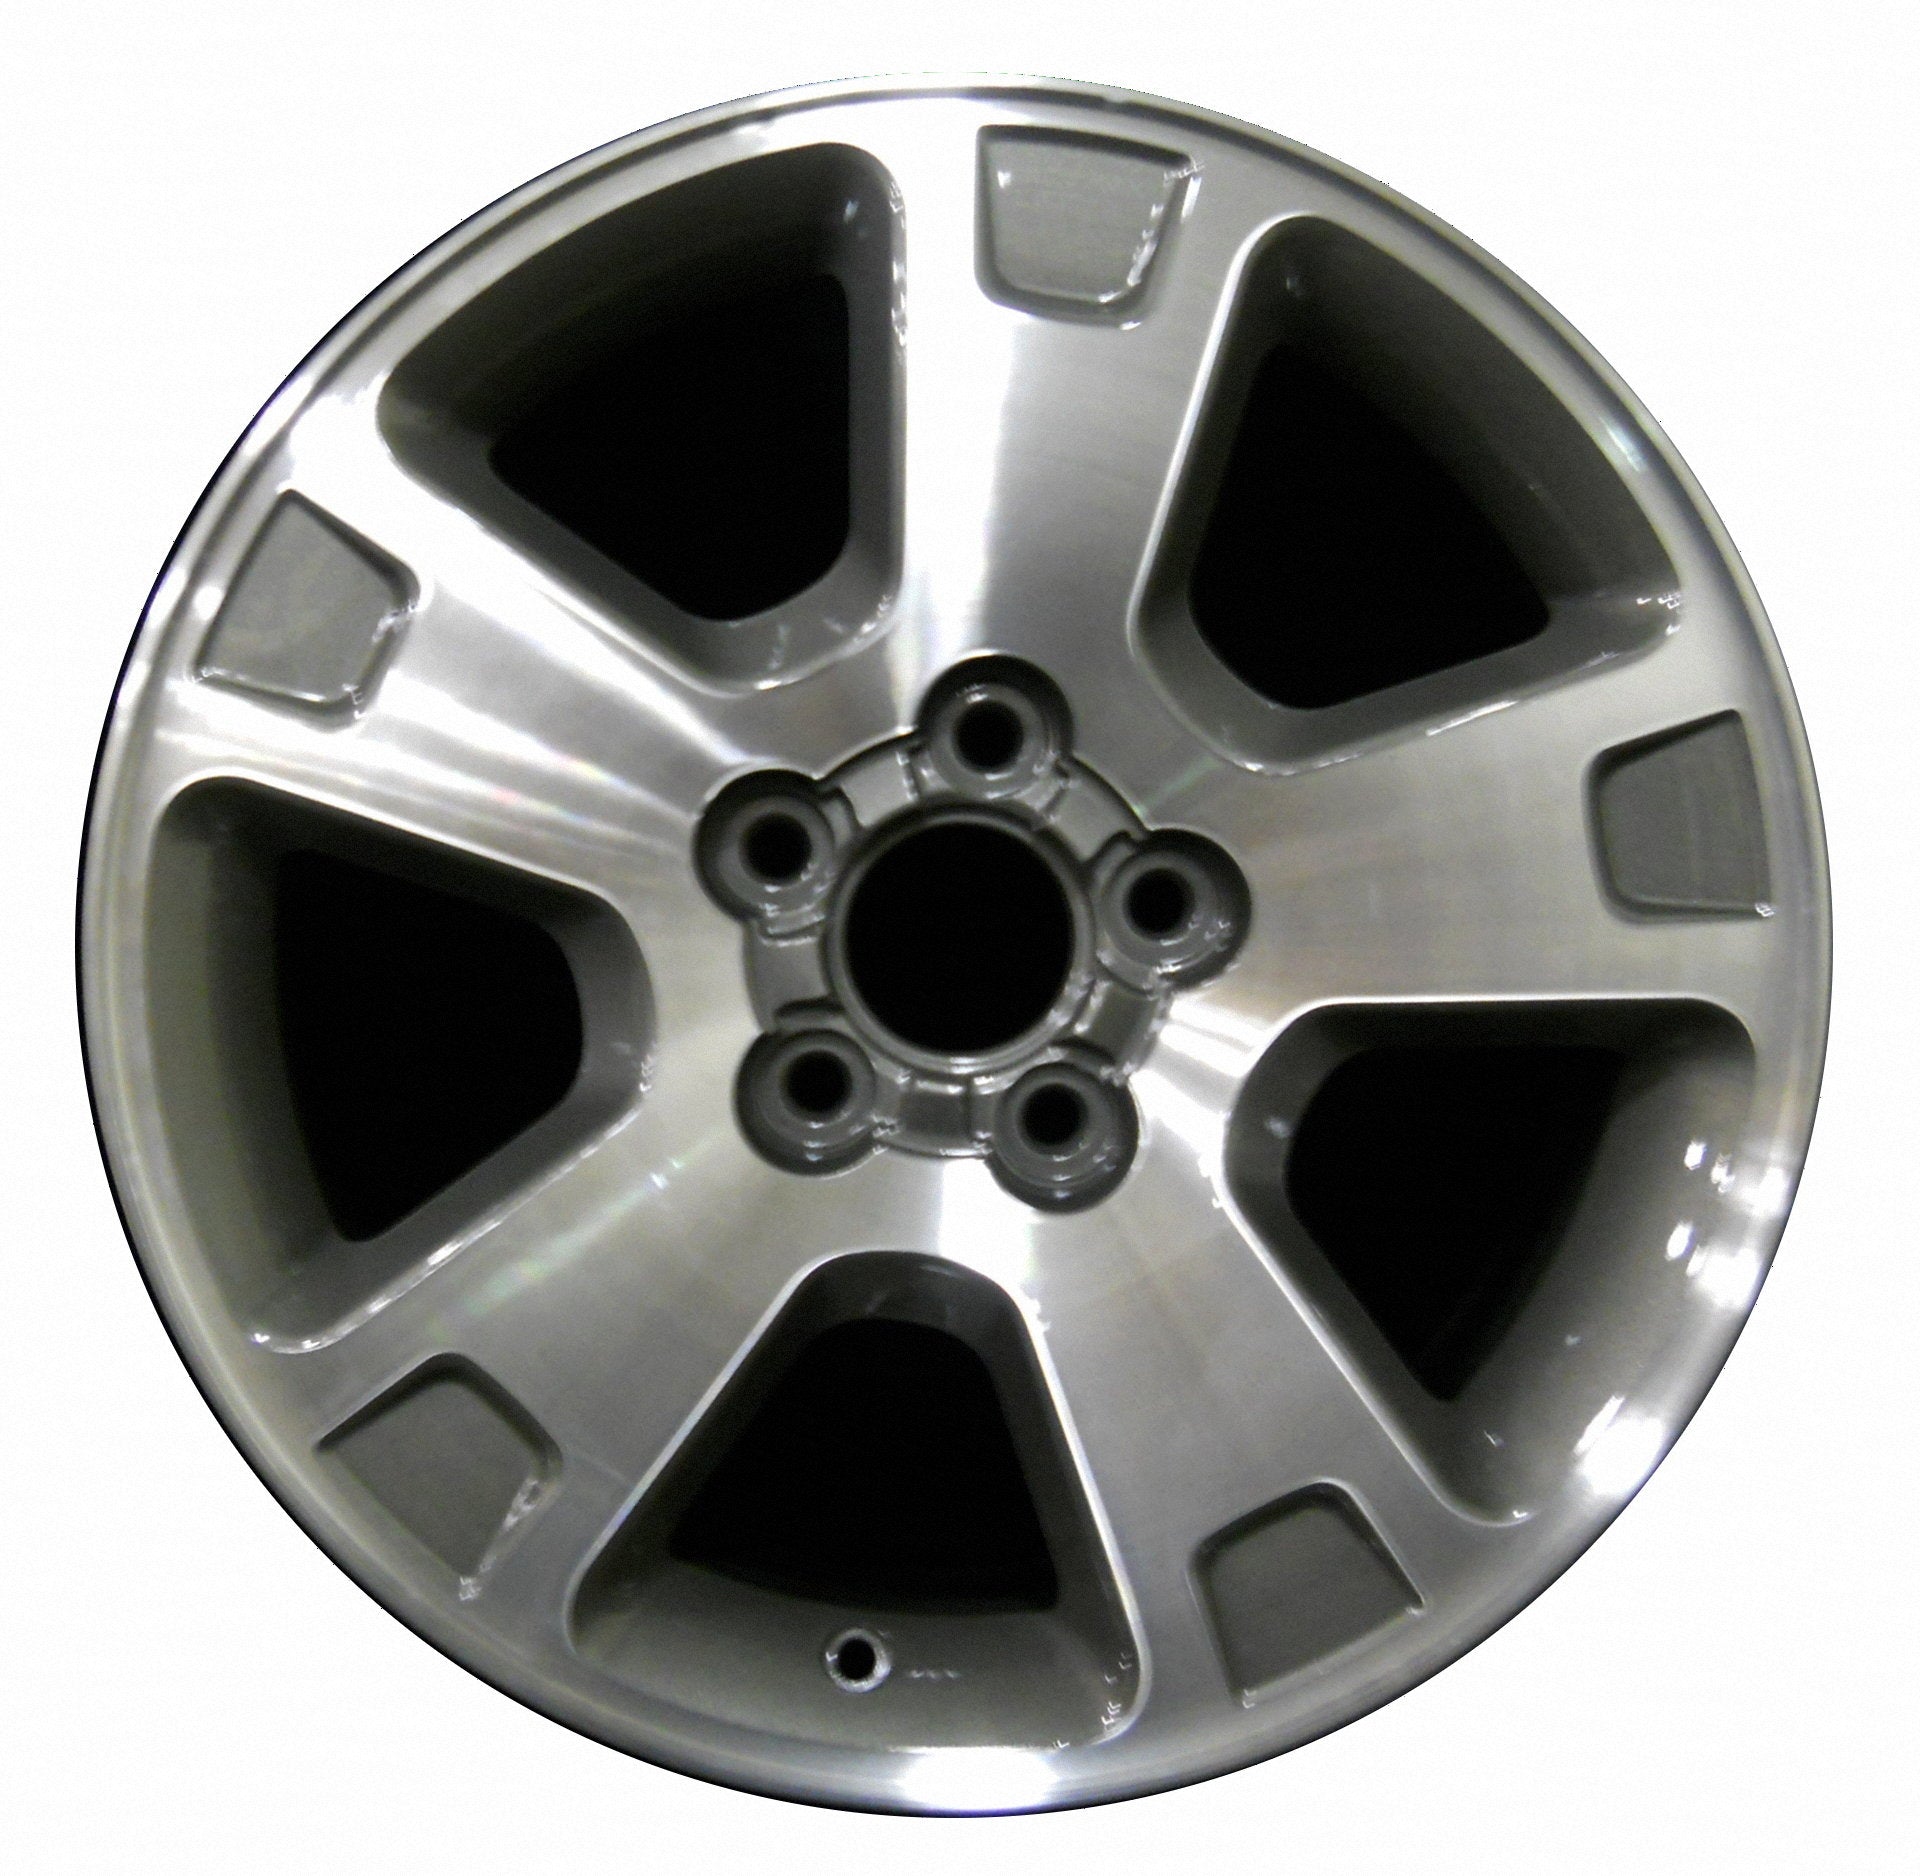 Ford Freestyle  2005, 2006, 2007 Factory OEM Car Wheel Size 17x7 Alloy WAO.3571.PC03.MA